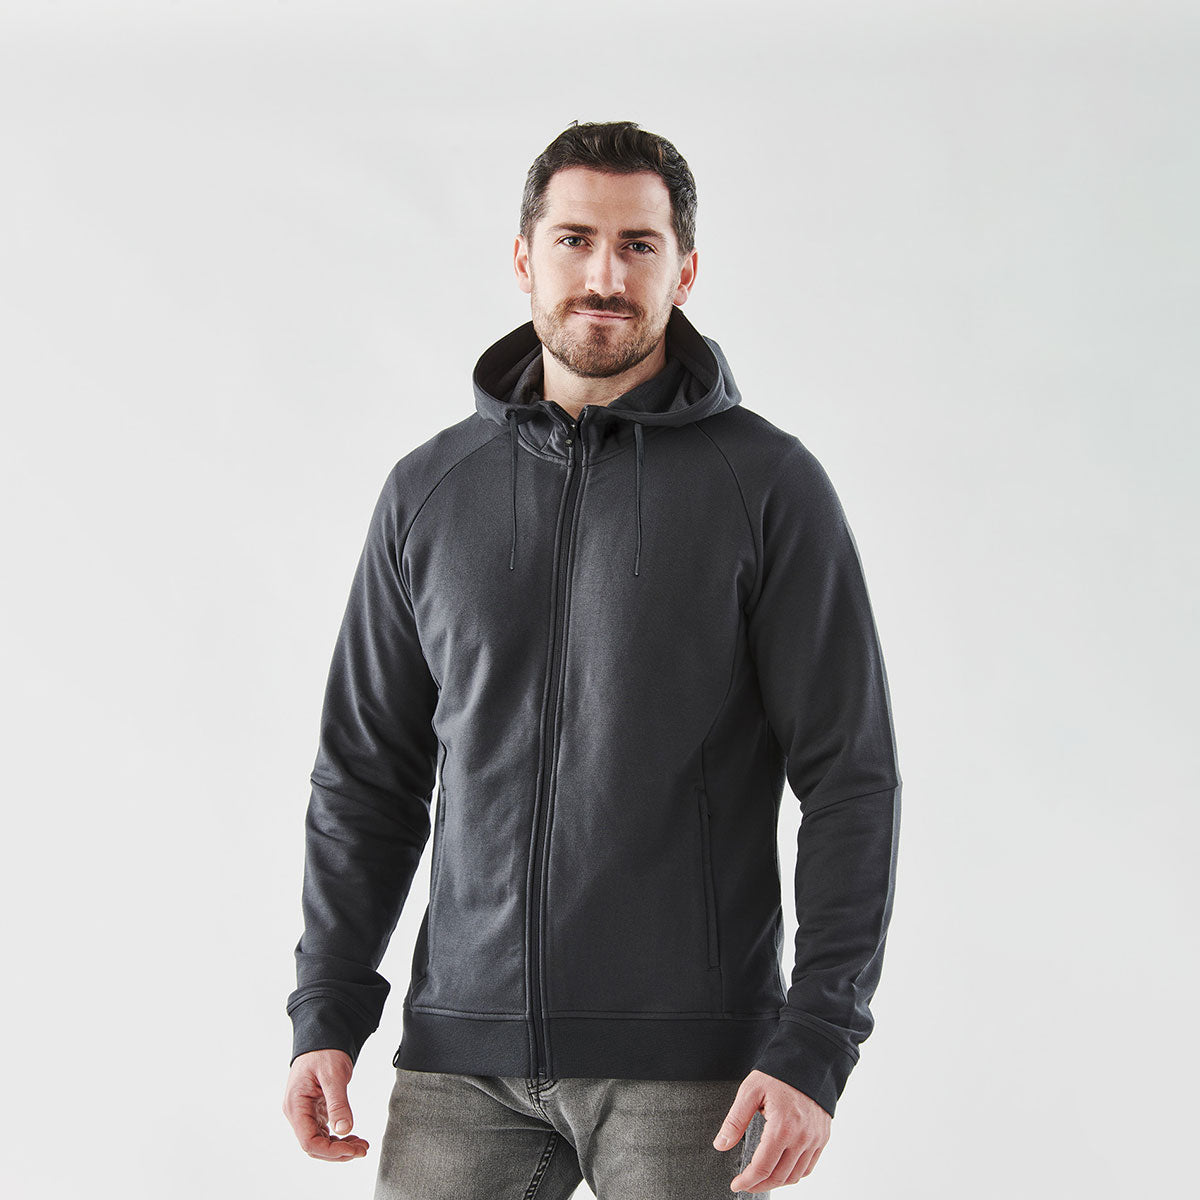 Lululemon Coats And Jackets Sale Canada - Up To 60% OFF Now